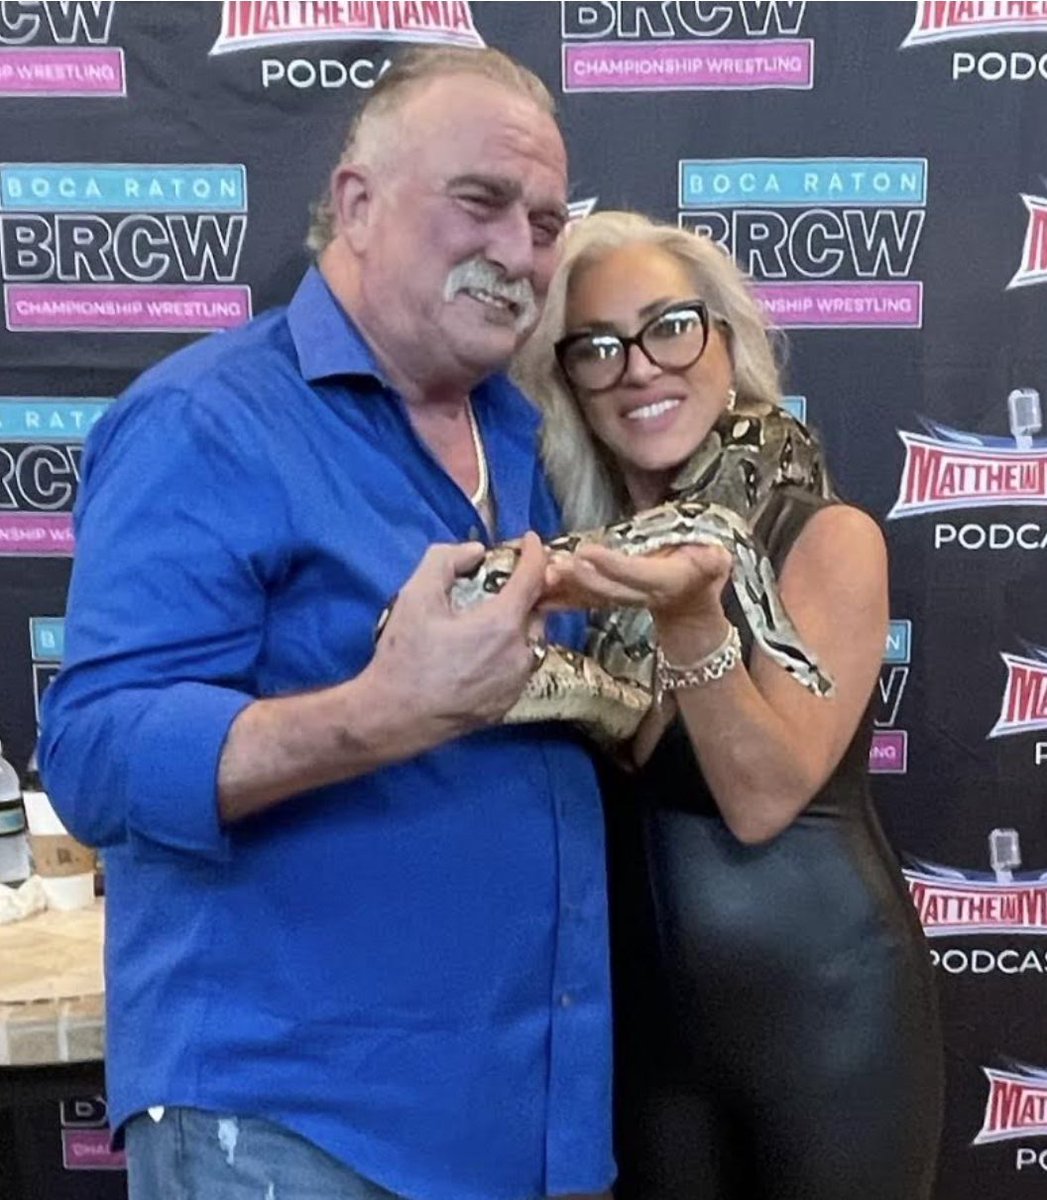 Great time yesterday with @brcwflorida! Great to see friends like @MissyBeefcake, meet fans, and even reunite with Damien! #AEW #AEWDynamite